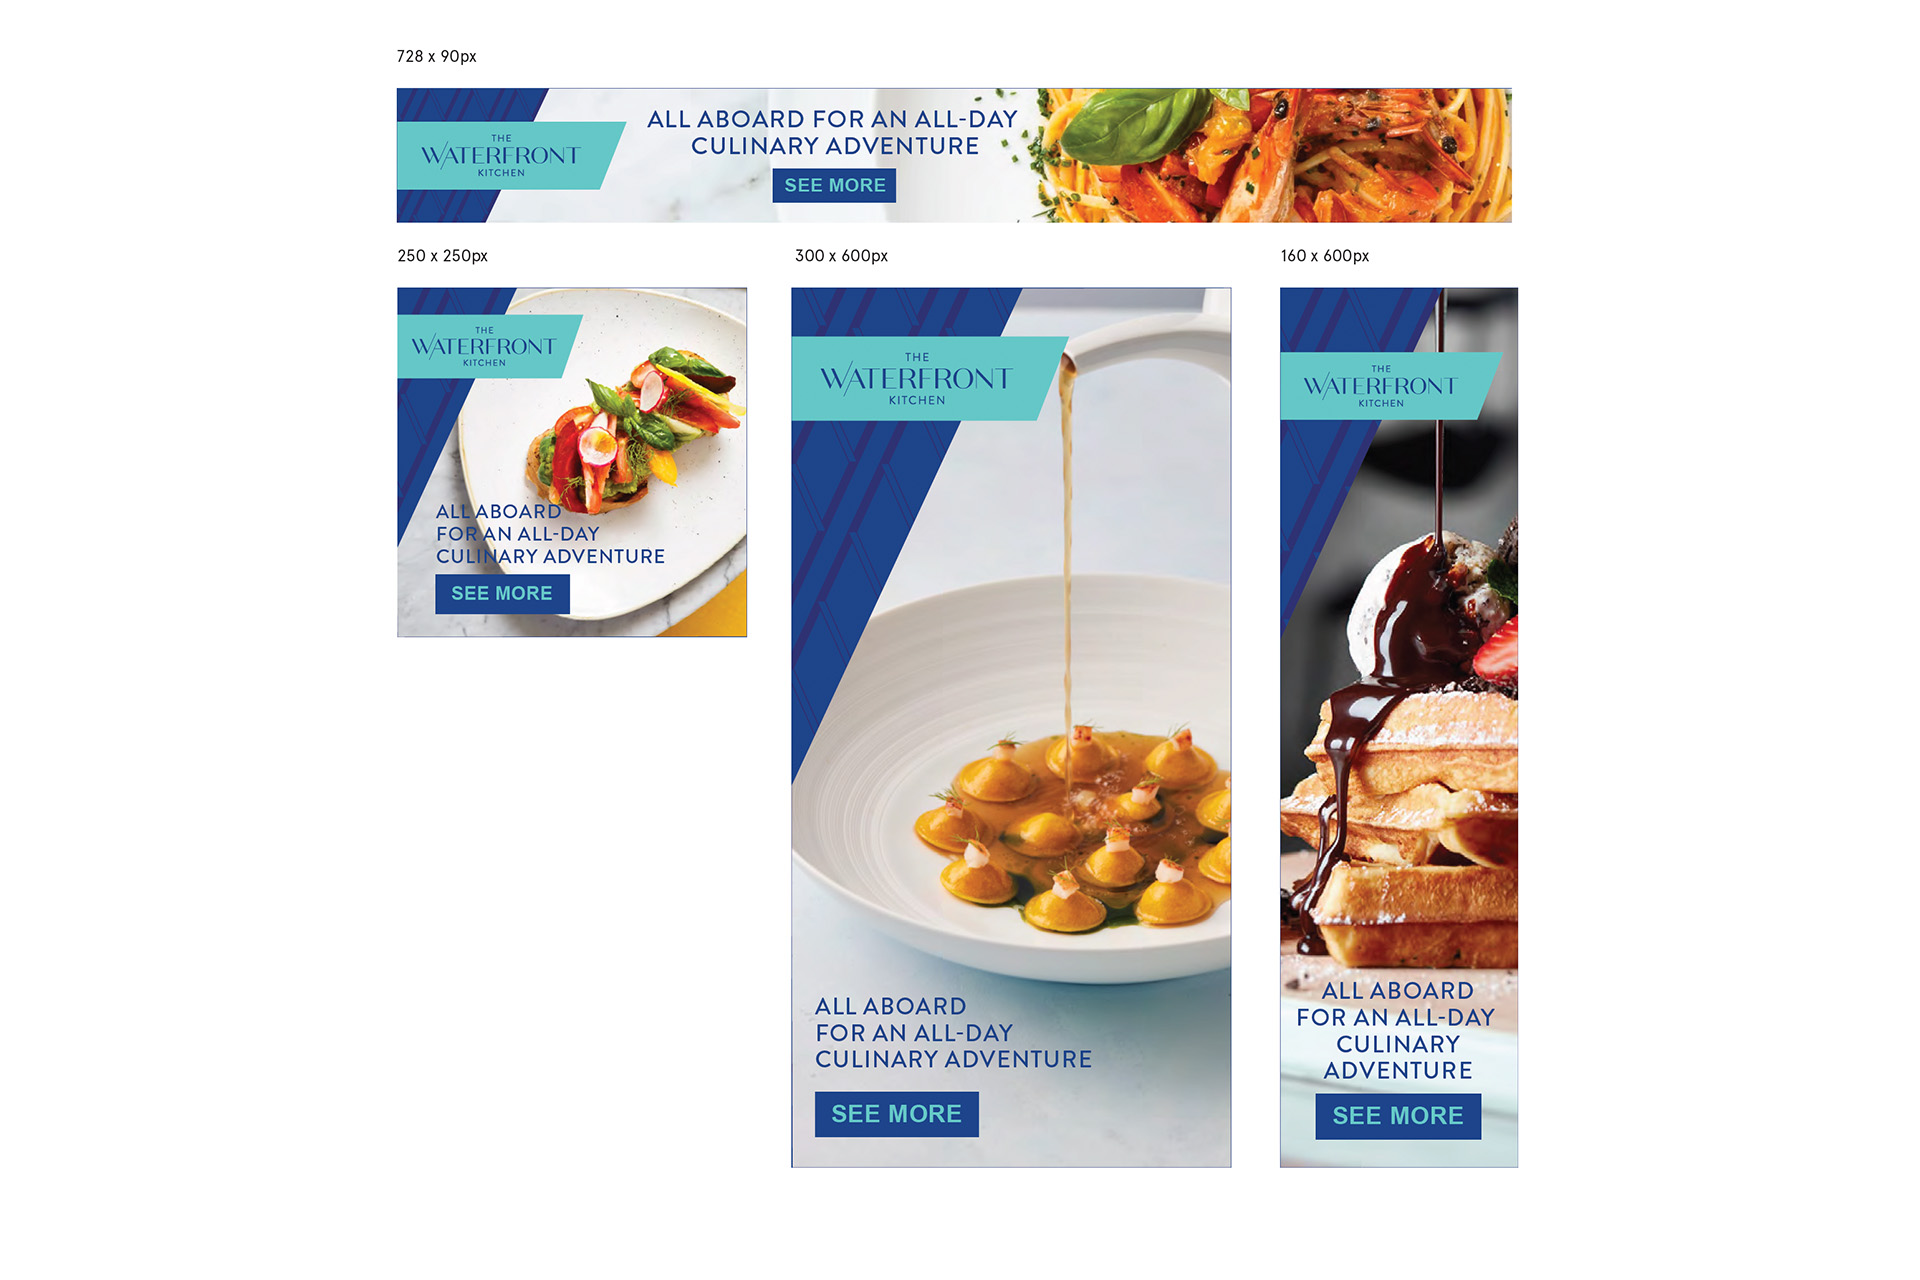 All Day Dining Outlet Online Banners Design